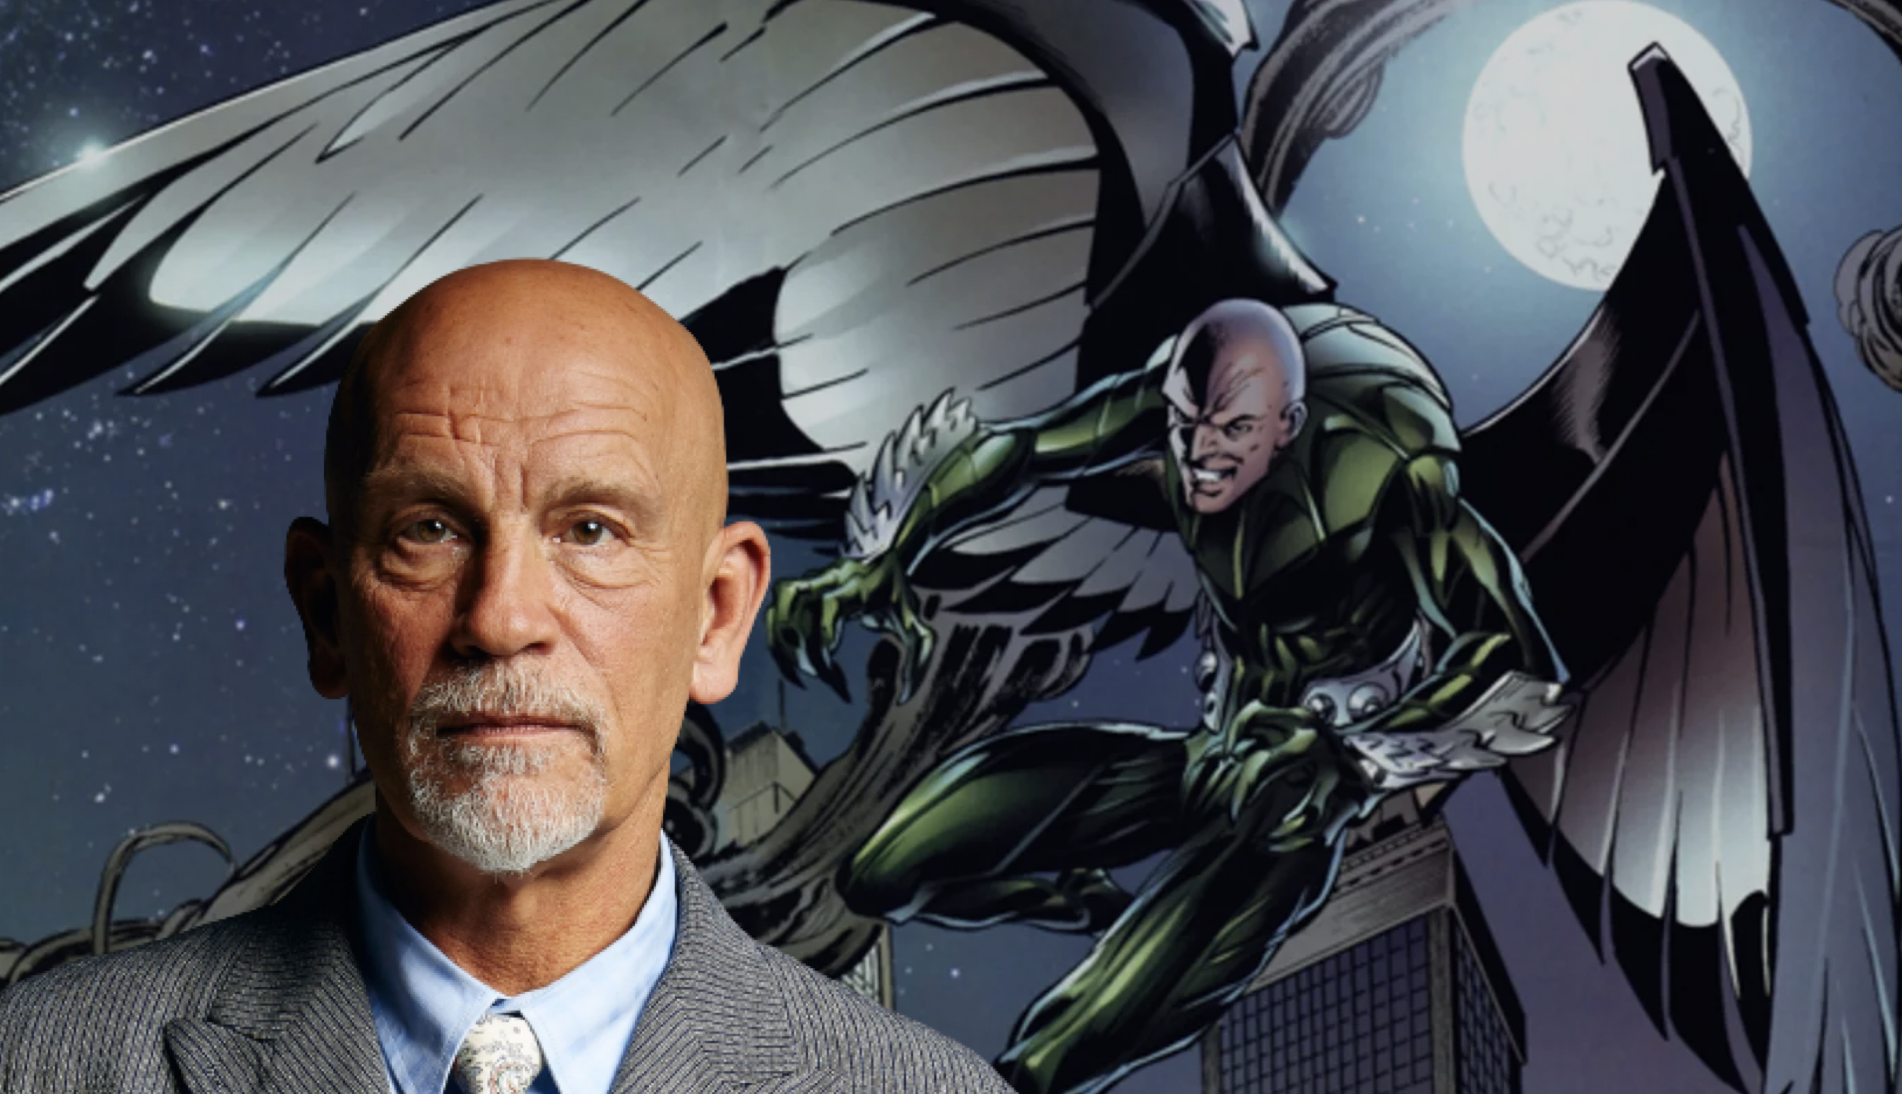 SEE IT: John Malkovich’s Vulture Costume From ‘Spider-Man 4’ Revealed